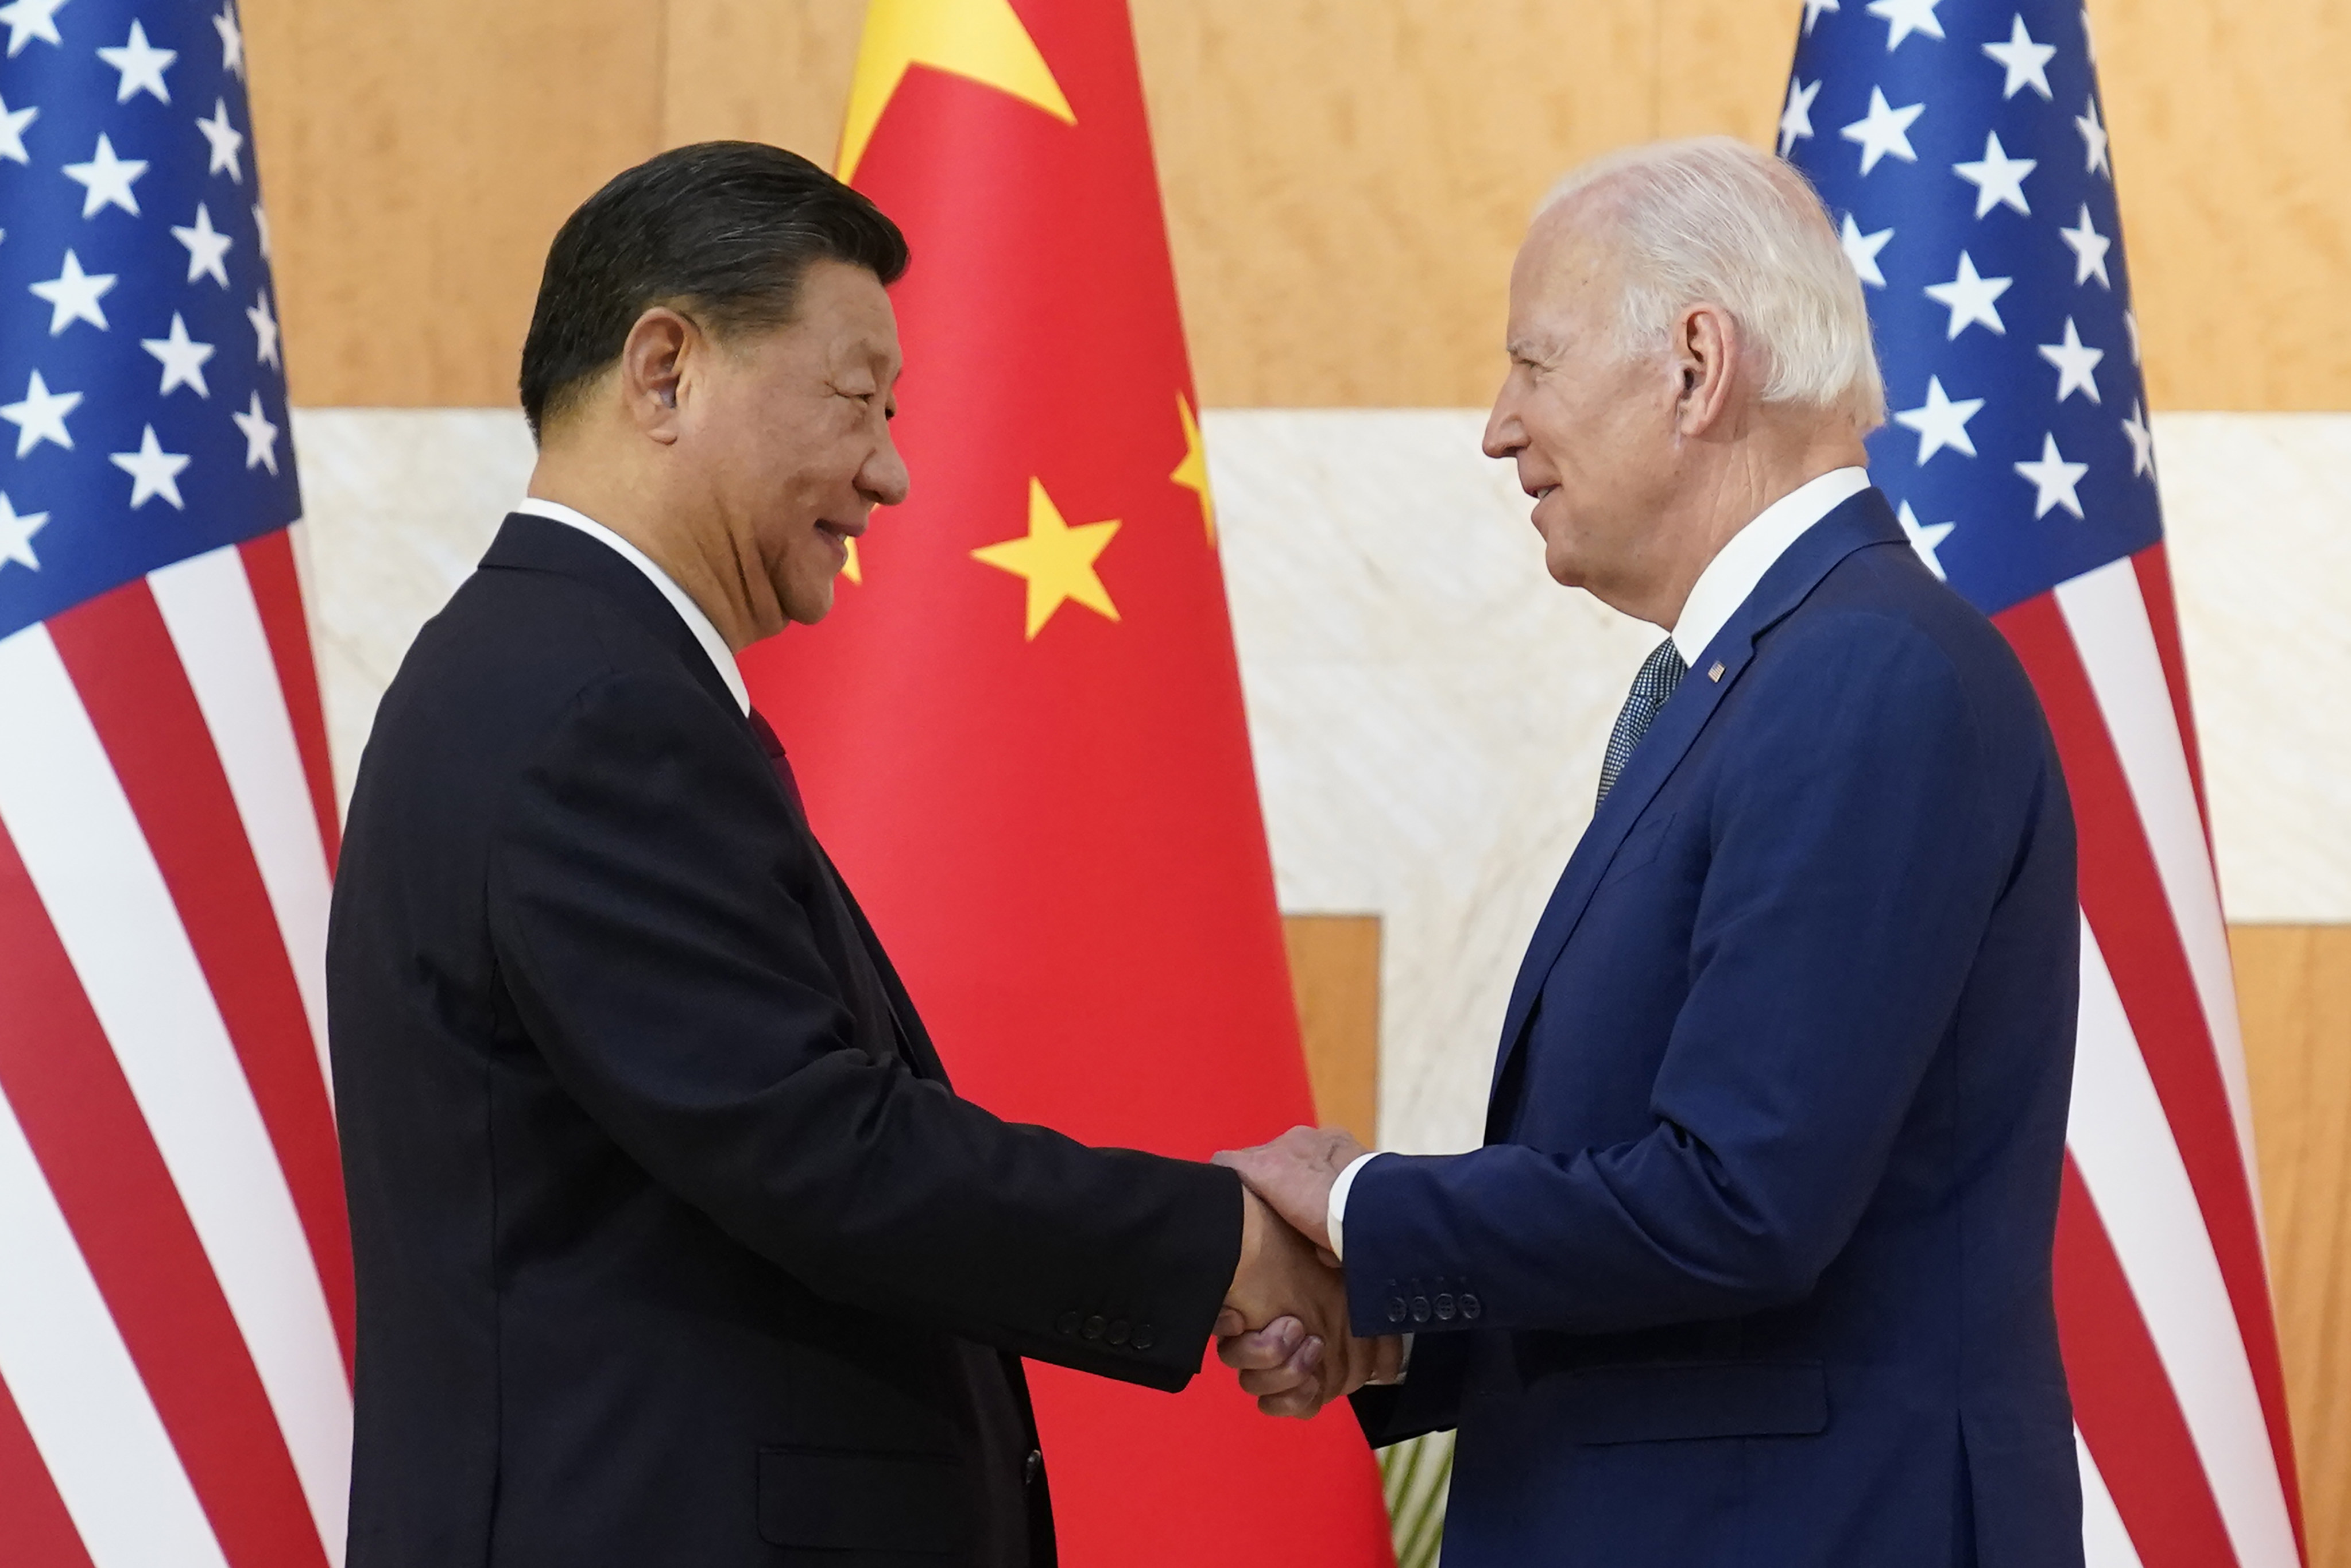 Chinese President Xi Jinping and US President Joe Biden shake hands before their meeting on the sidelines of the G20 summit in Bali, on Monday. Photo: AP Photo